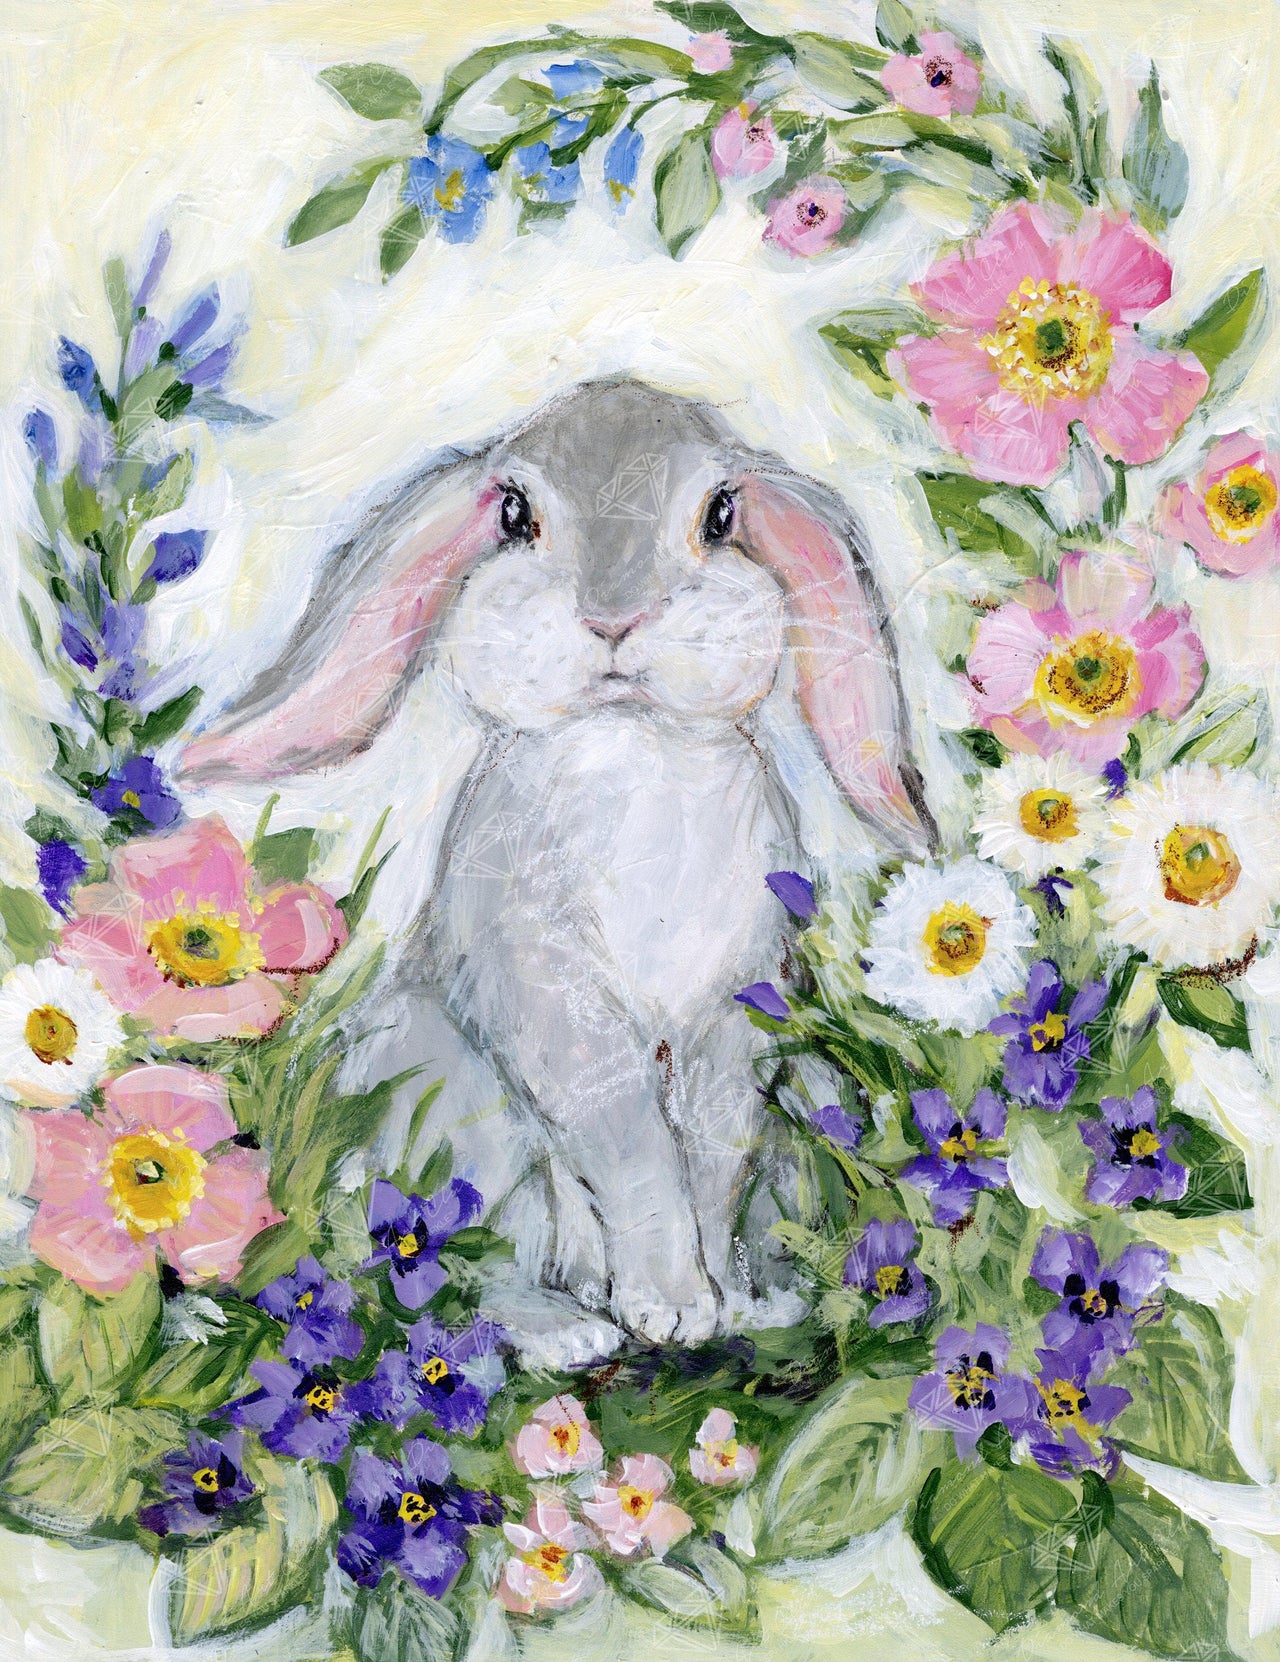 Diamond Painting Grey Bunny With Floppy Ears 20" x 26" (51cm x 66cm) / Round with 59 Colors including 4 ABs / 42,535